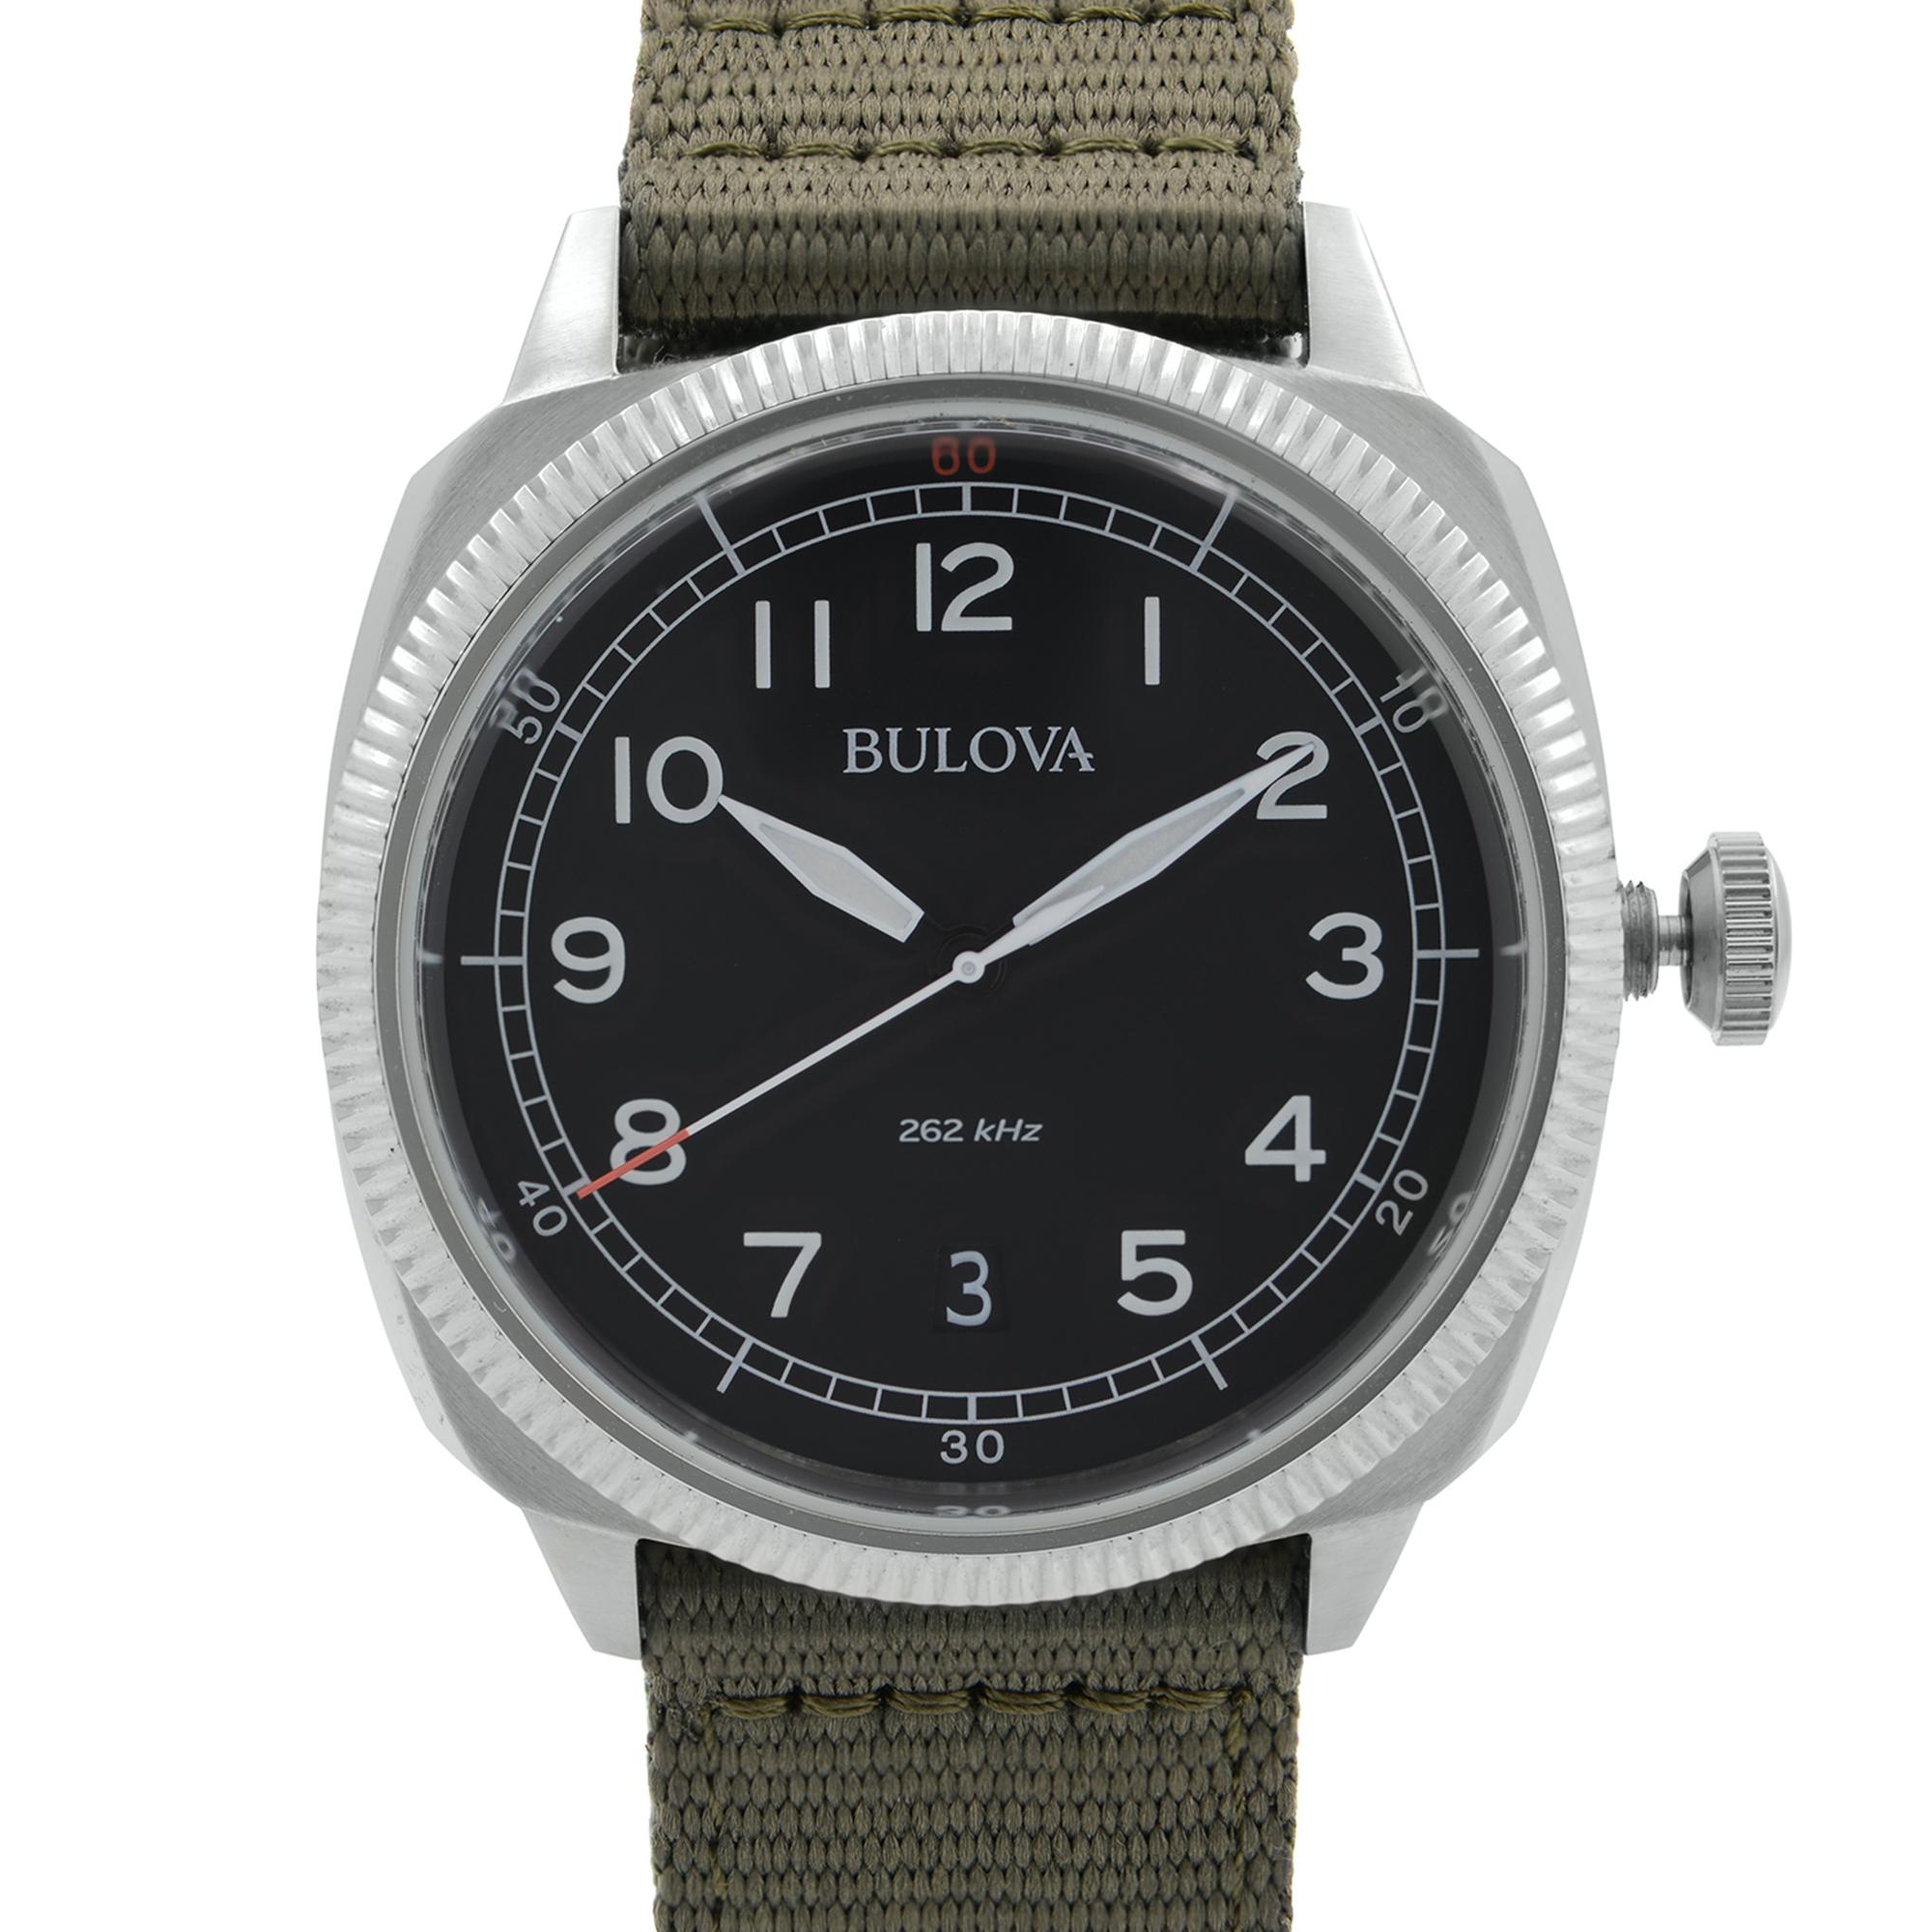 Unworn Bulova Military UHF Steel Black Dial Green Nylon Strap Mens Quartz Watch 96B229. This Beautiful Timepiece is Powered by Quartz (Battery) Movement And Features: Round Stainless Steel Case with a Green Nylon Strap. Fixed Stainless Steel Bezel.